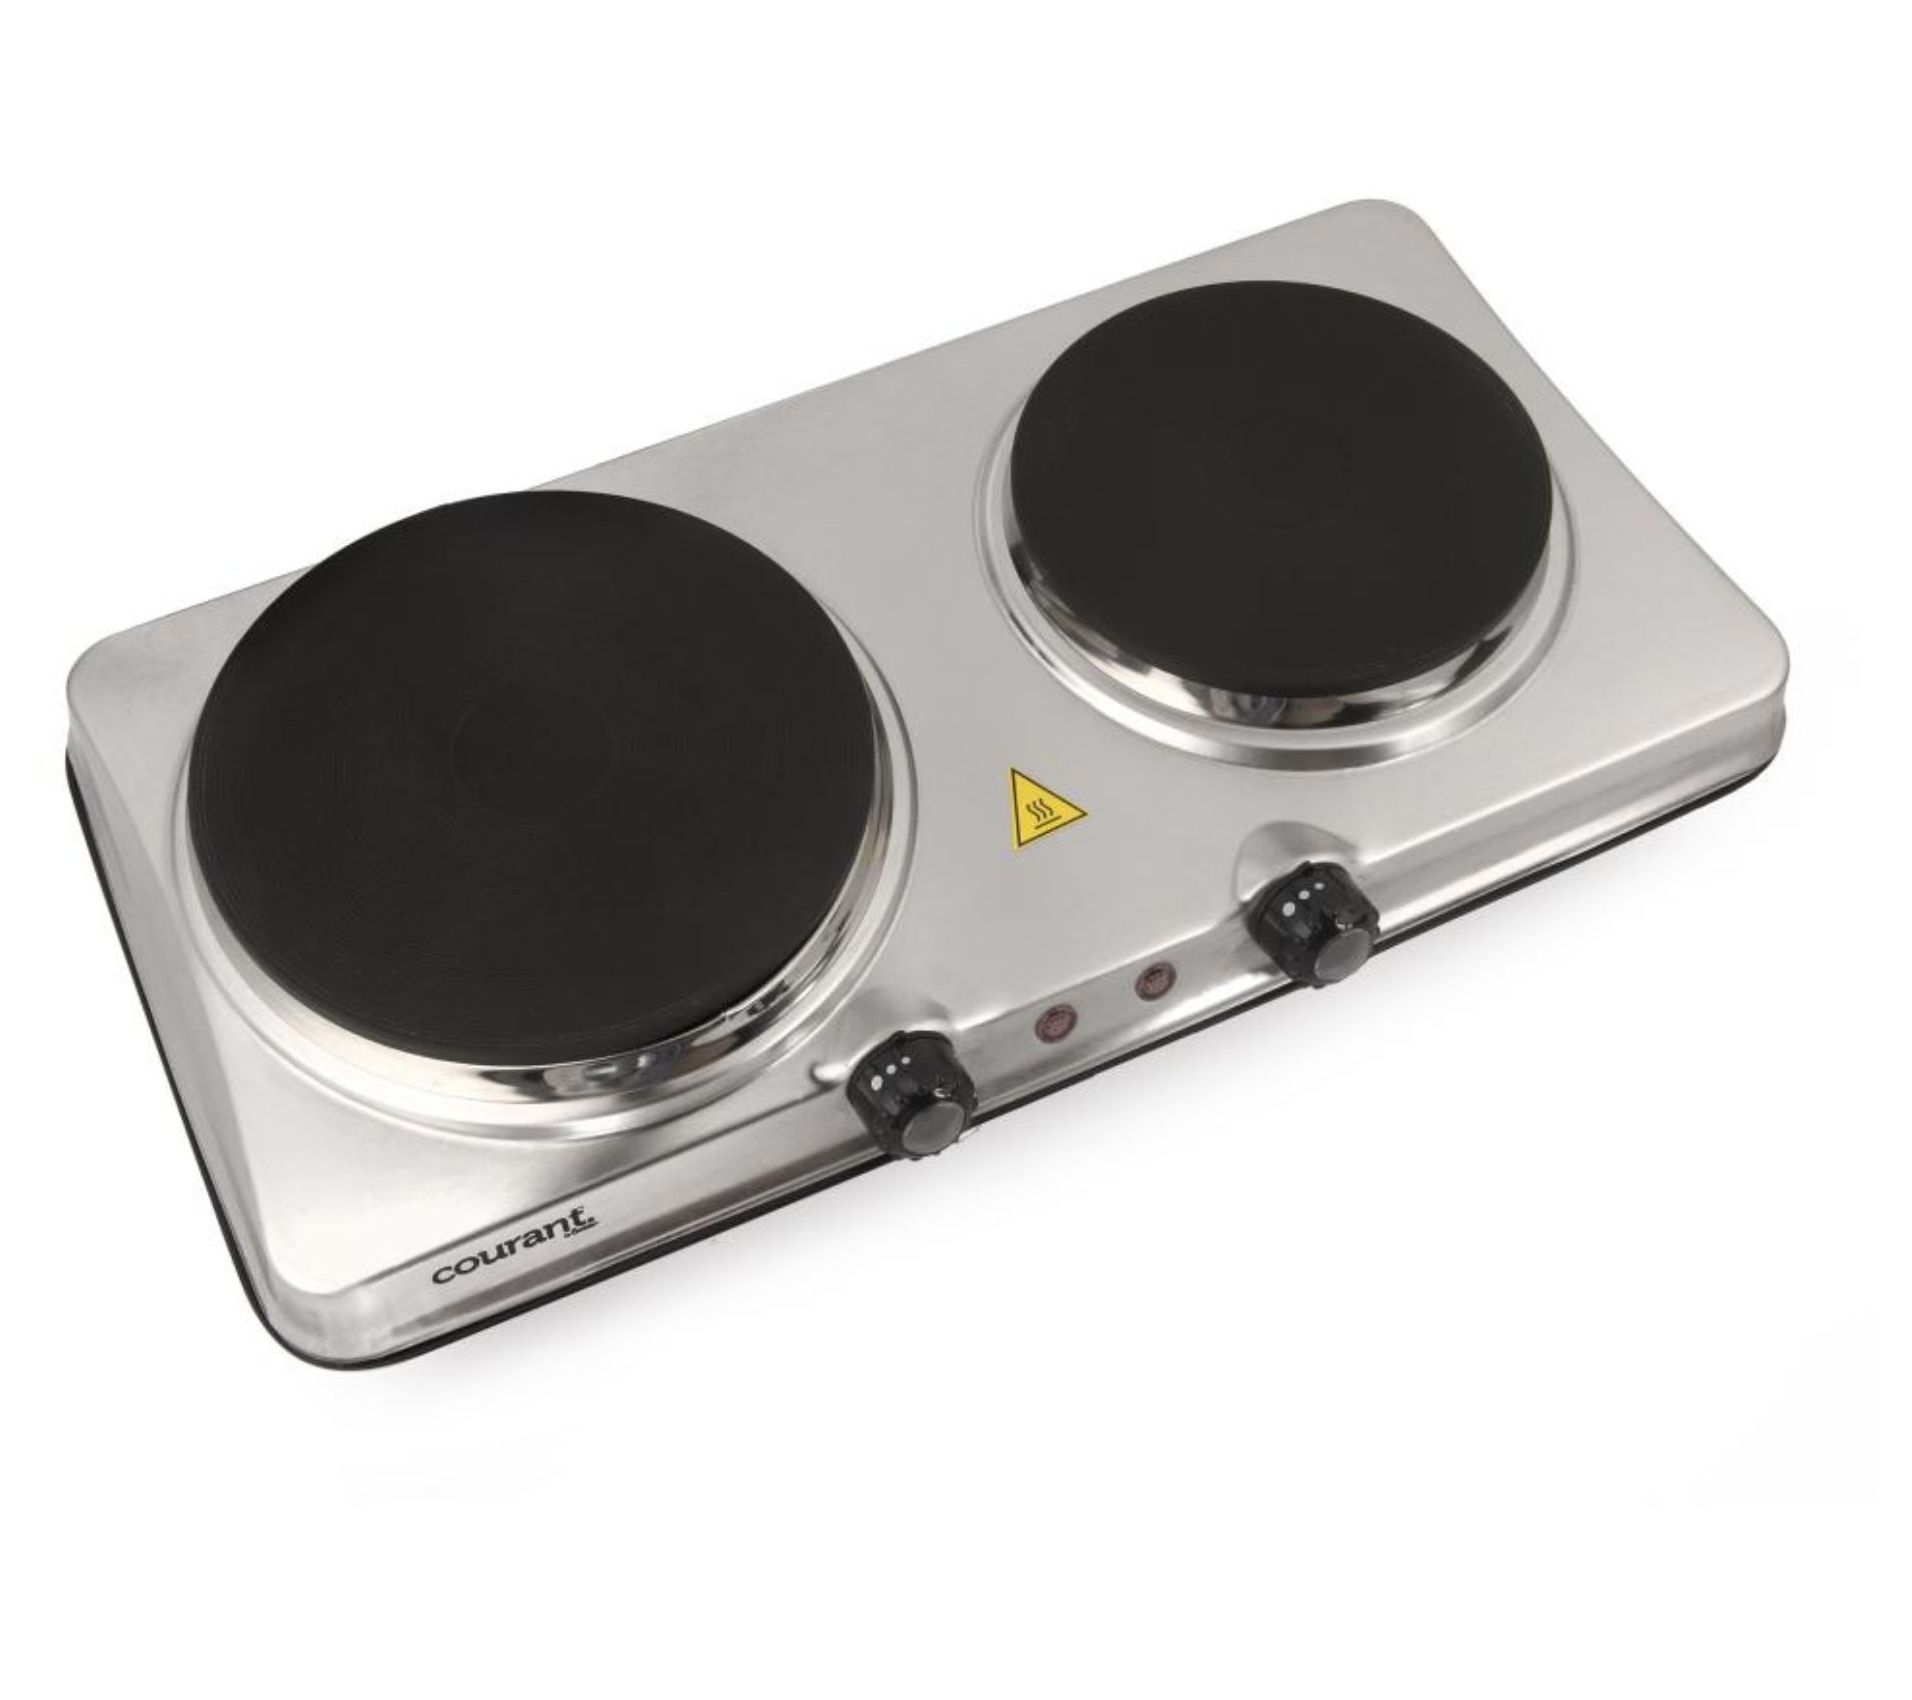 CEB2186ST Courant Double-Burner, 1700W Hot Plate, Stainless